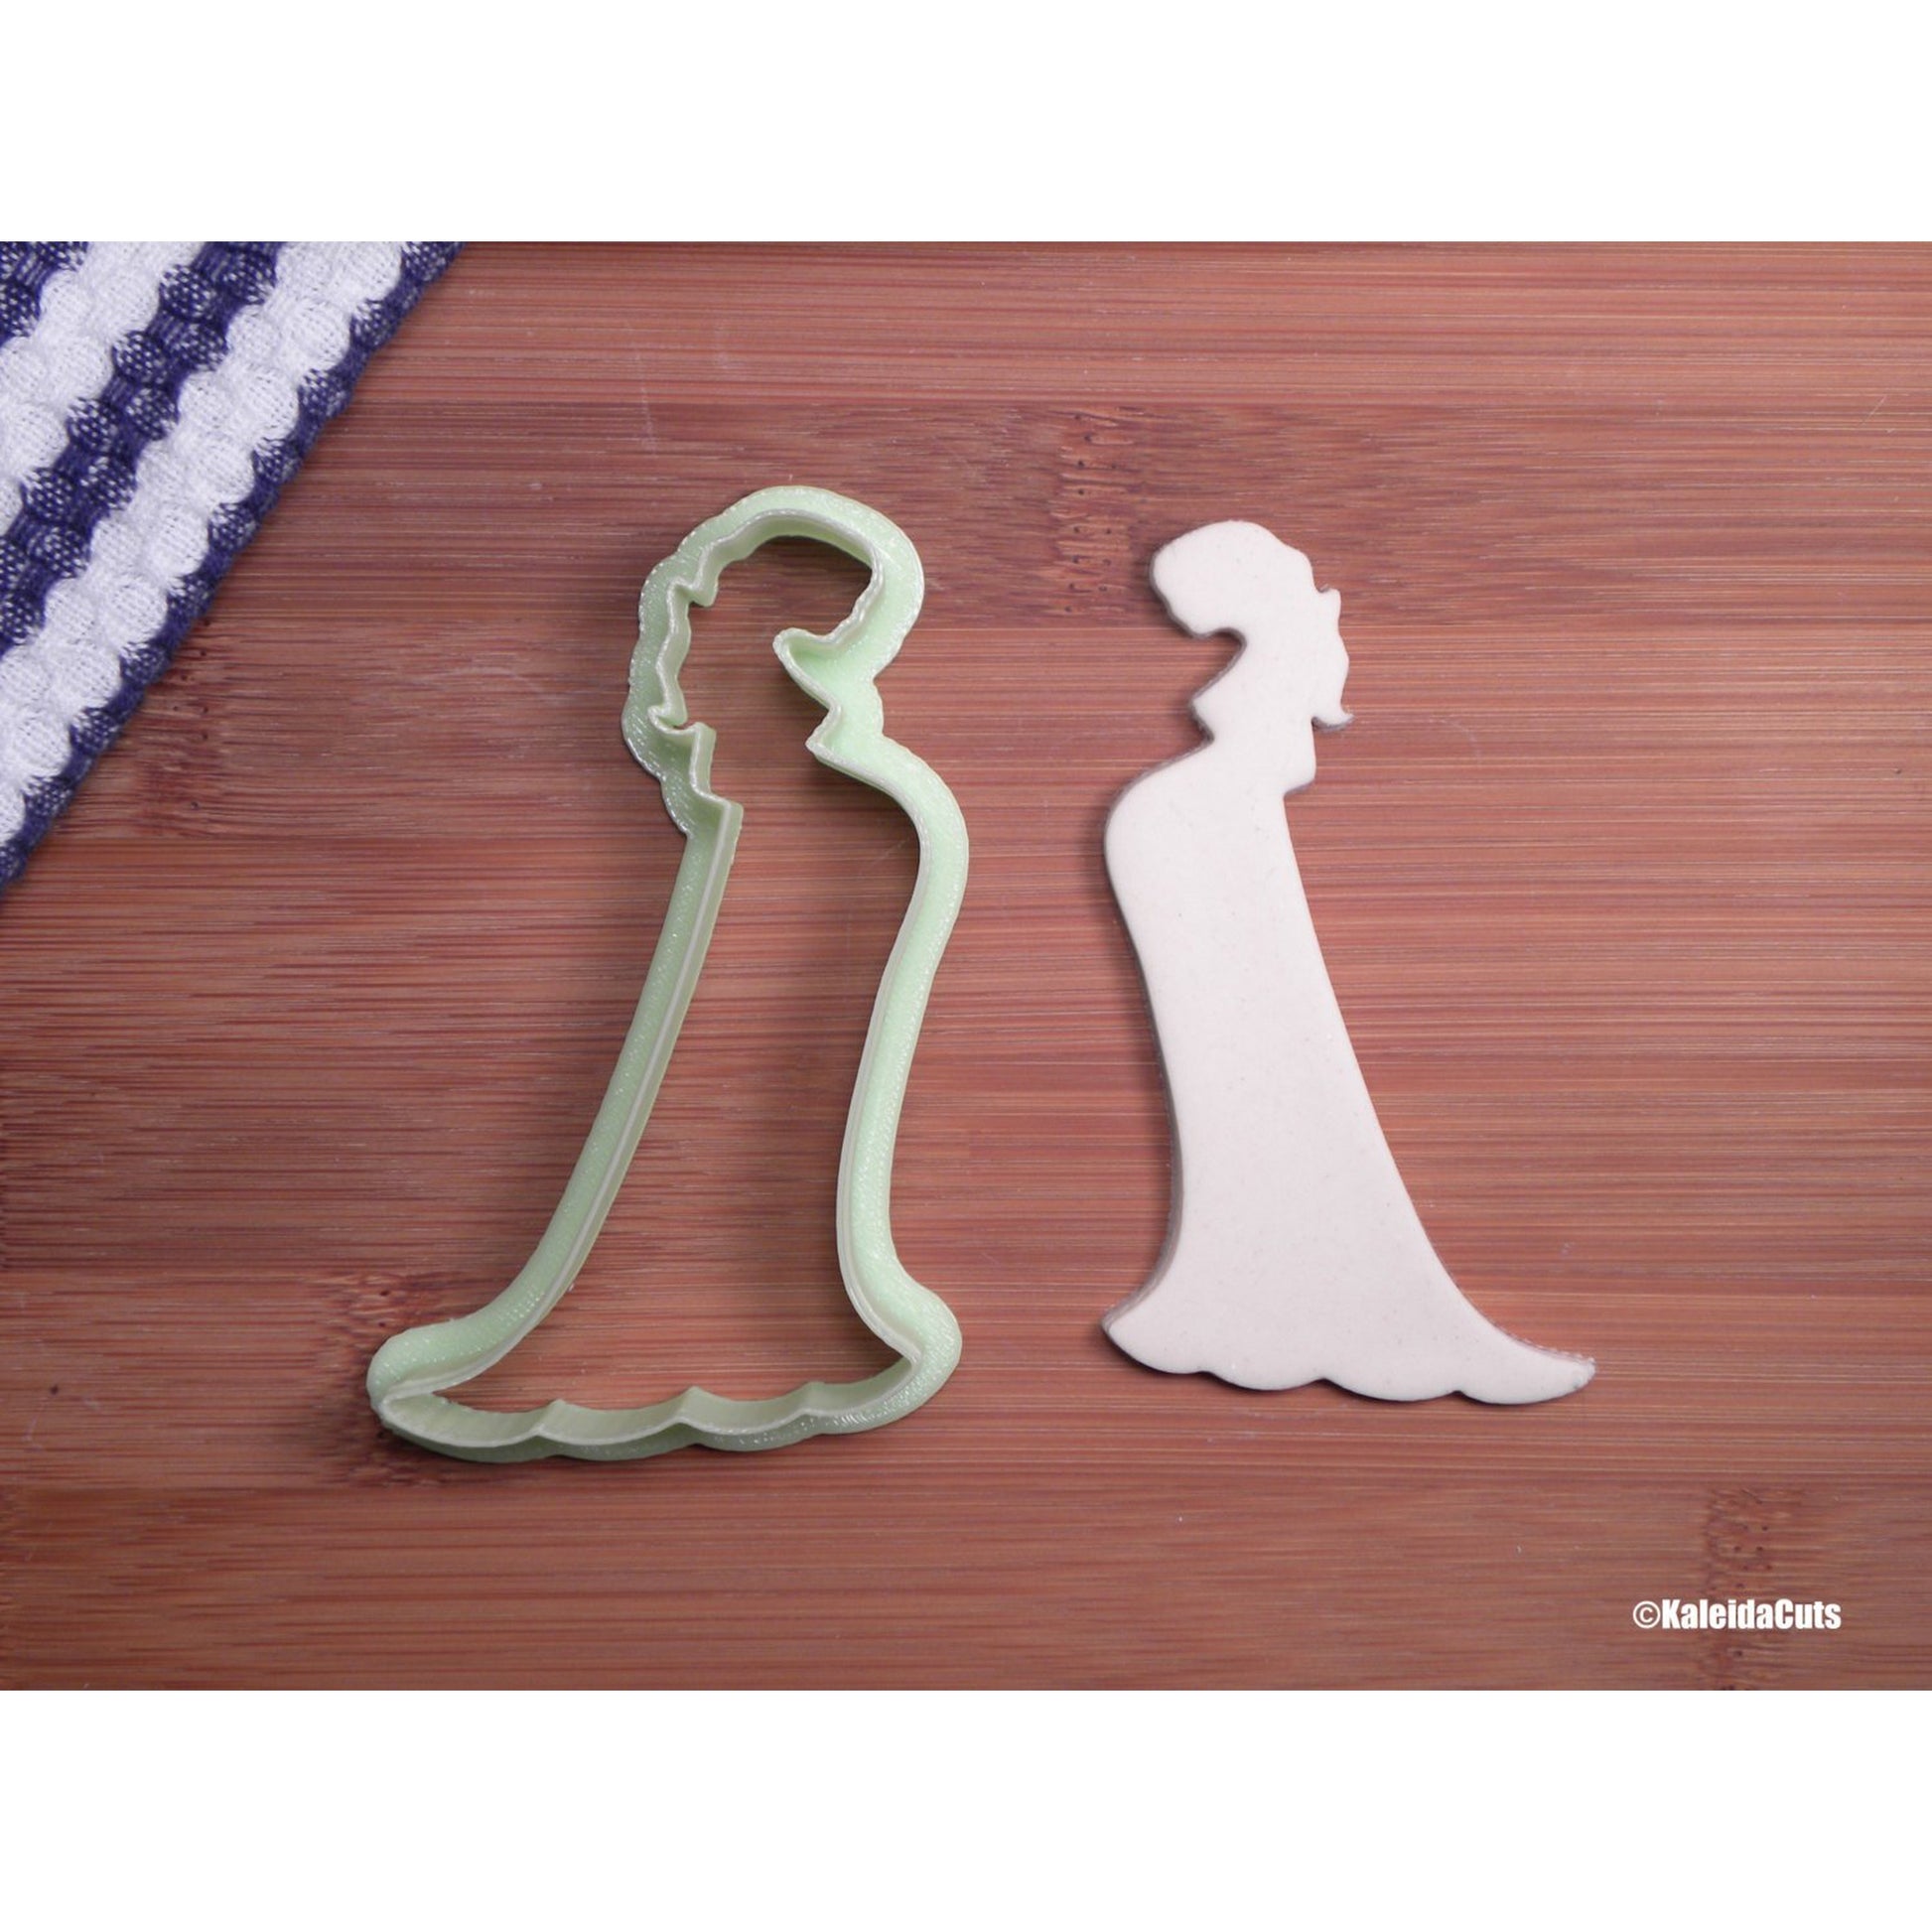 Pregnant Lady Cookie Cutter